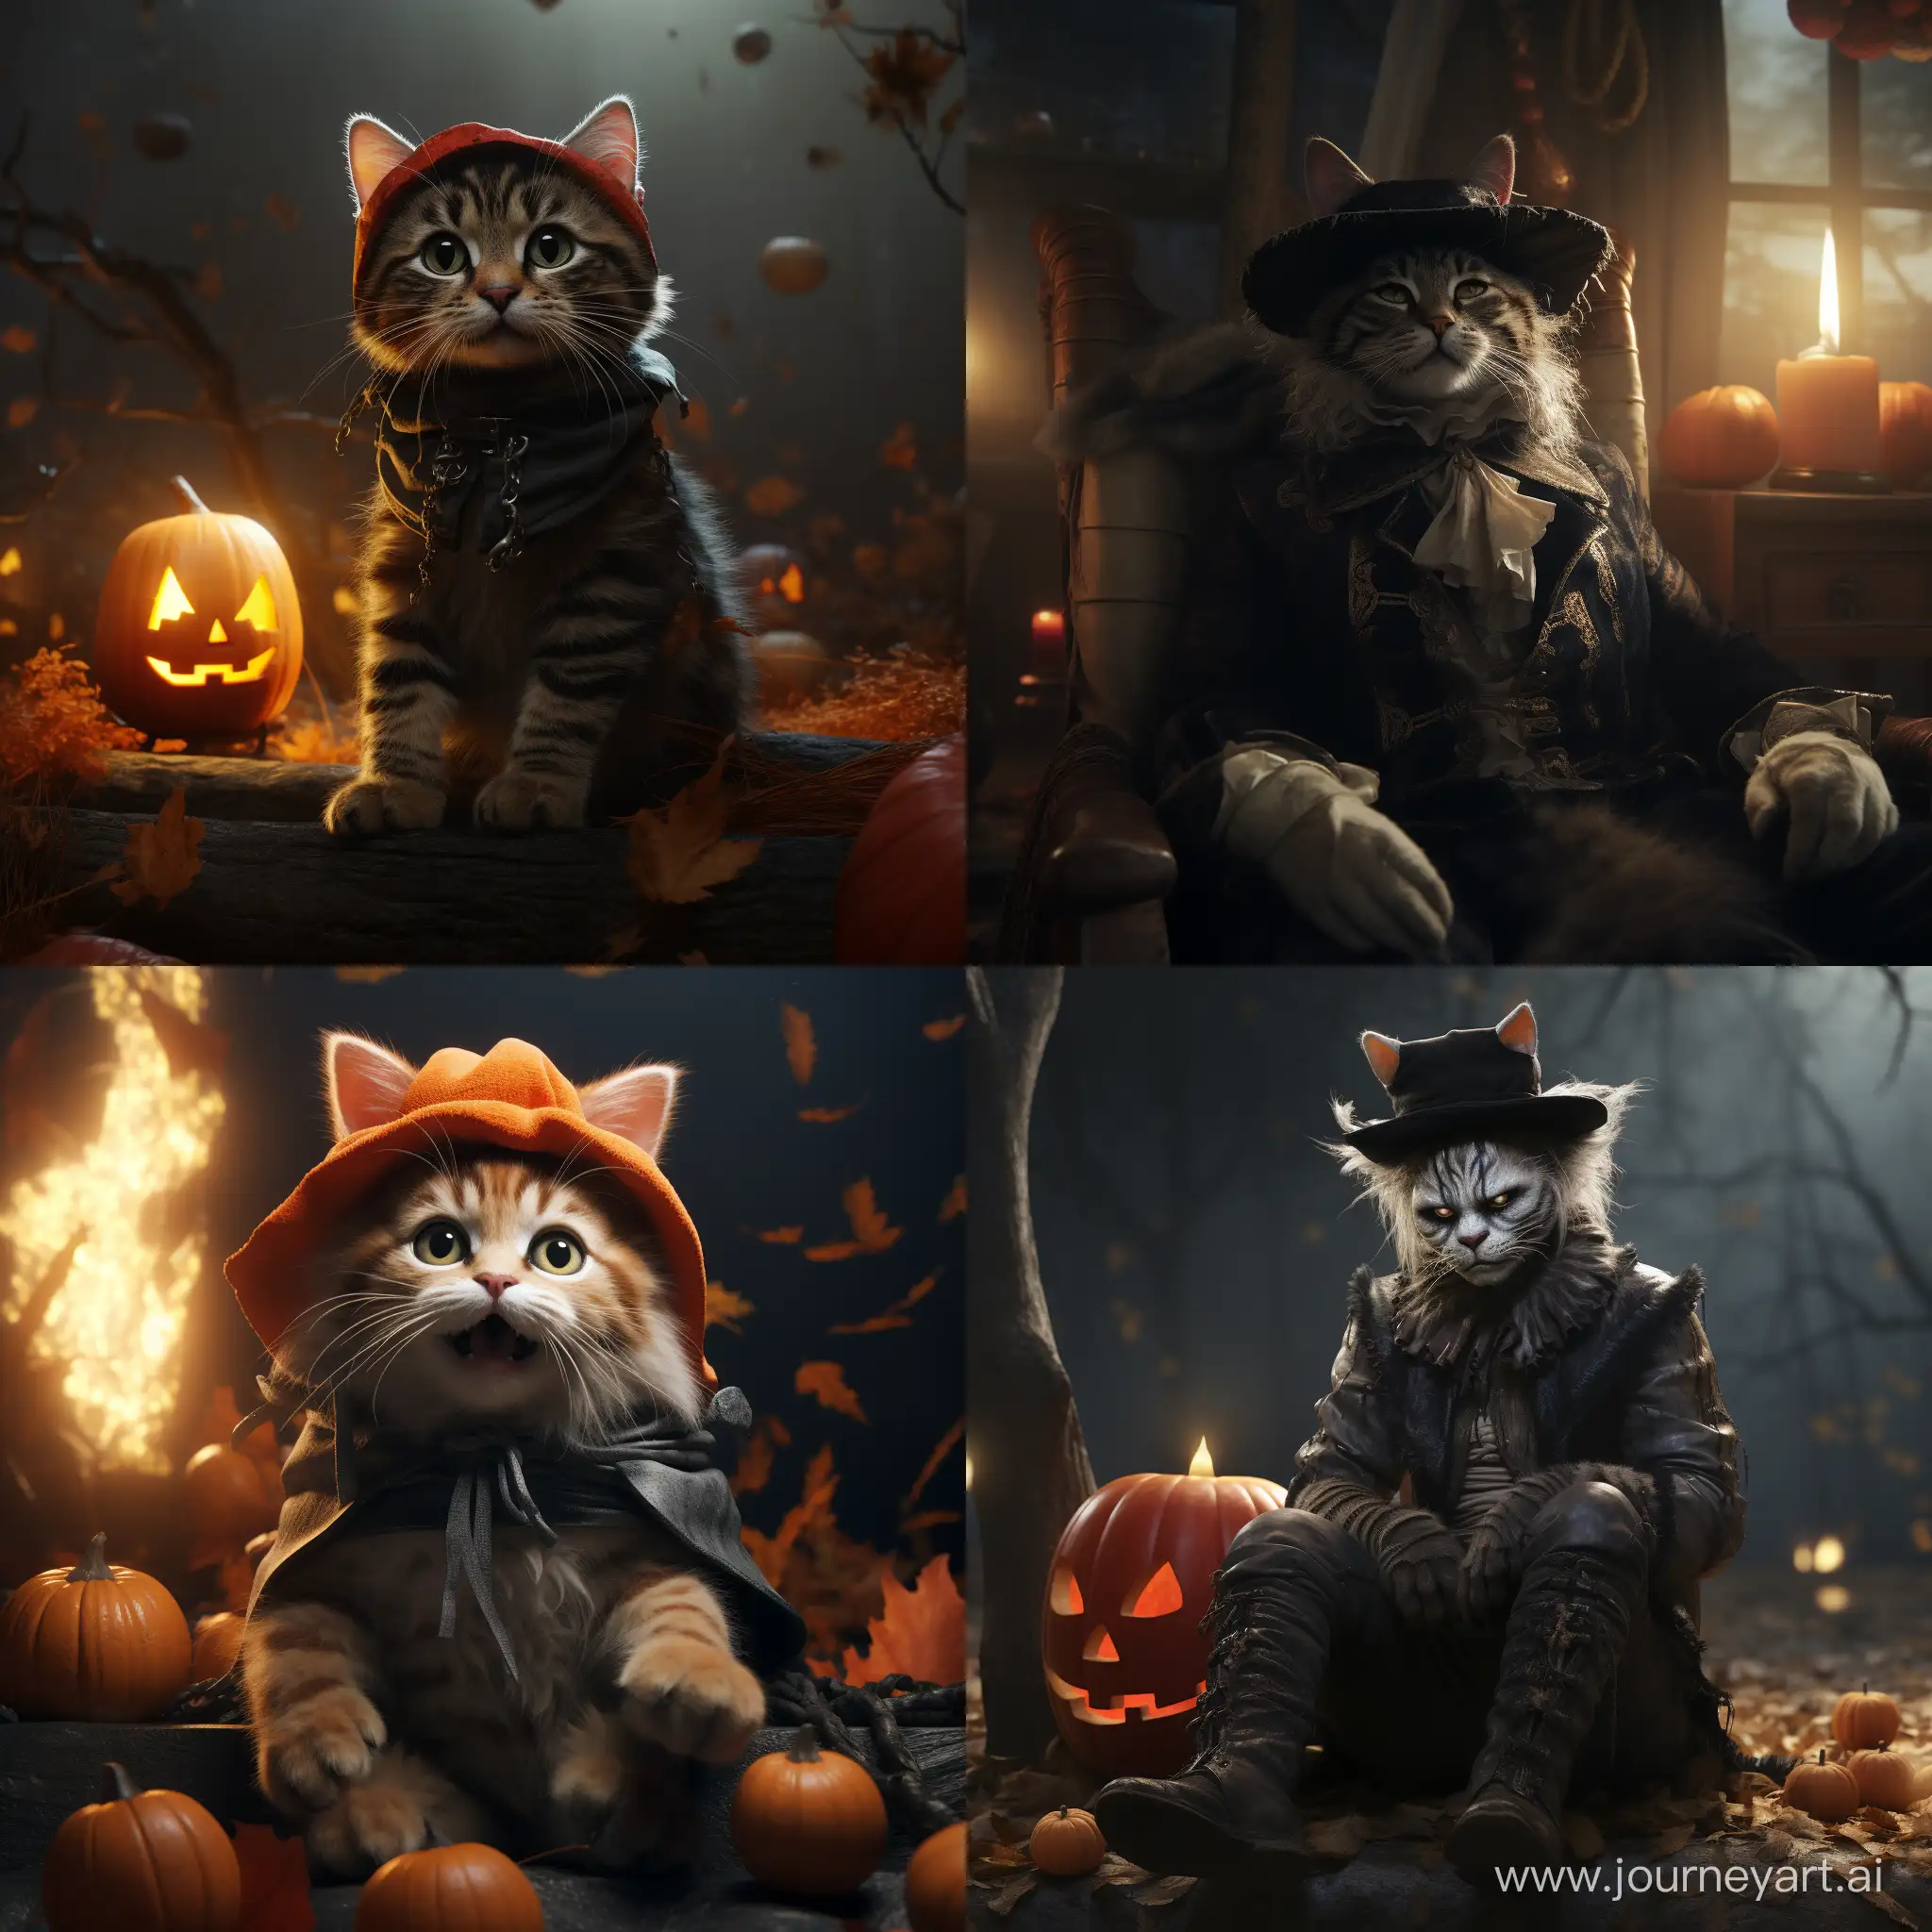 Clever-Cat-in-Halloween-Boots-Celebrates-in-Vibrant-4K-Cinematics